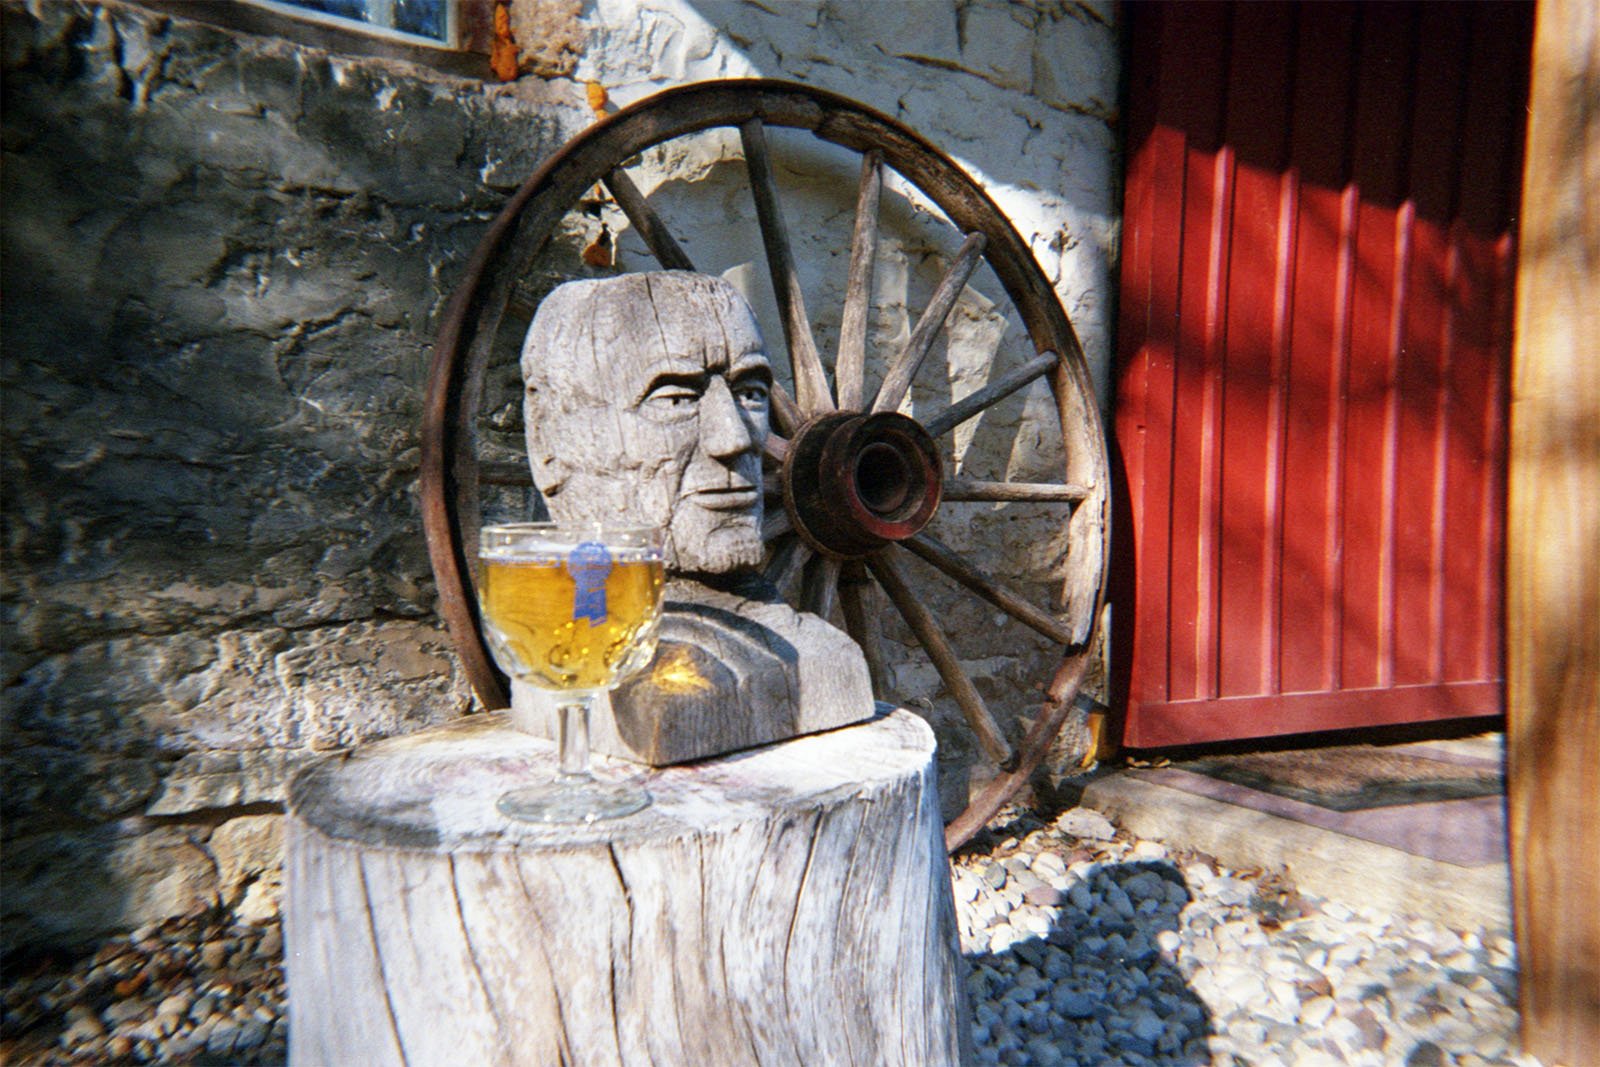 A stone carved head and a wooden wagon wheel are propped against a stone wall. In the foreground, a glass of beer sits atop a cut tree stump. A red door is partially visible on the right side of the image, casting shadows on the scene.